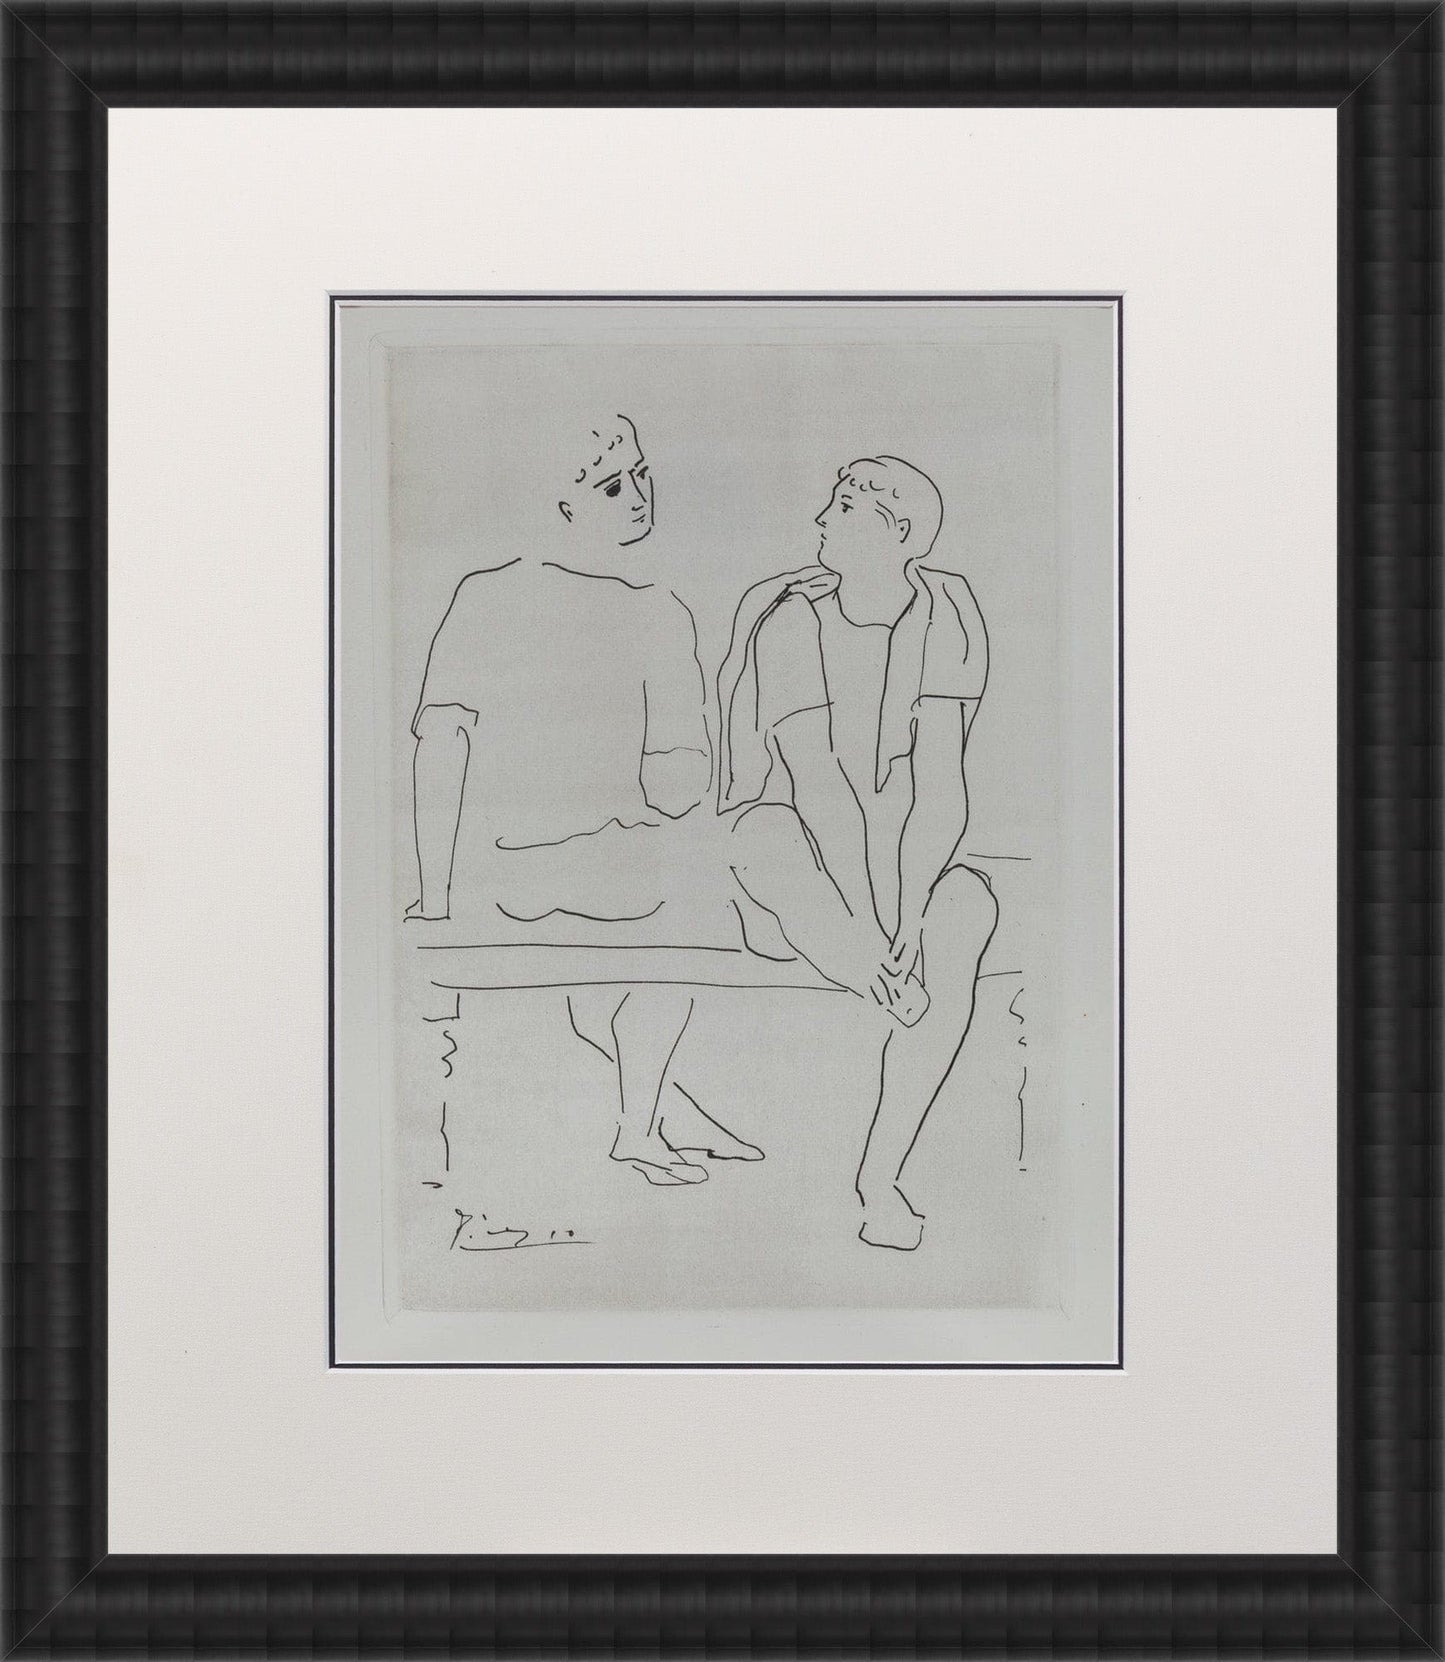 Pablo Picasso; Untitled from "Grace and Movement" 2